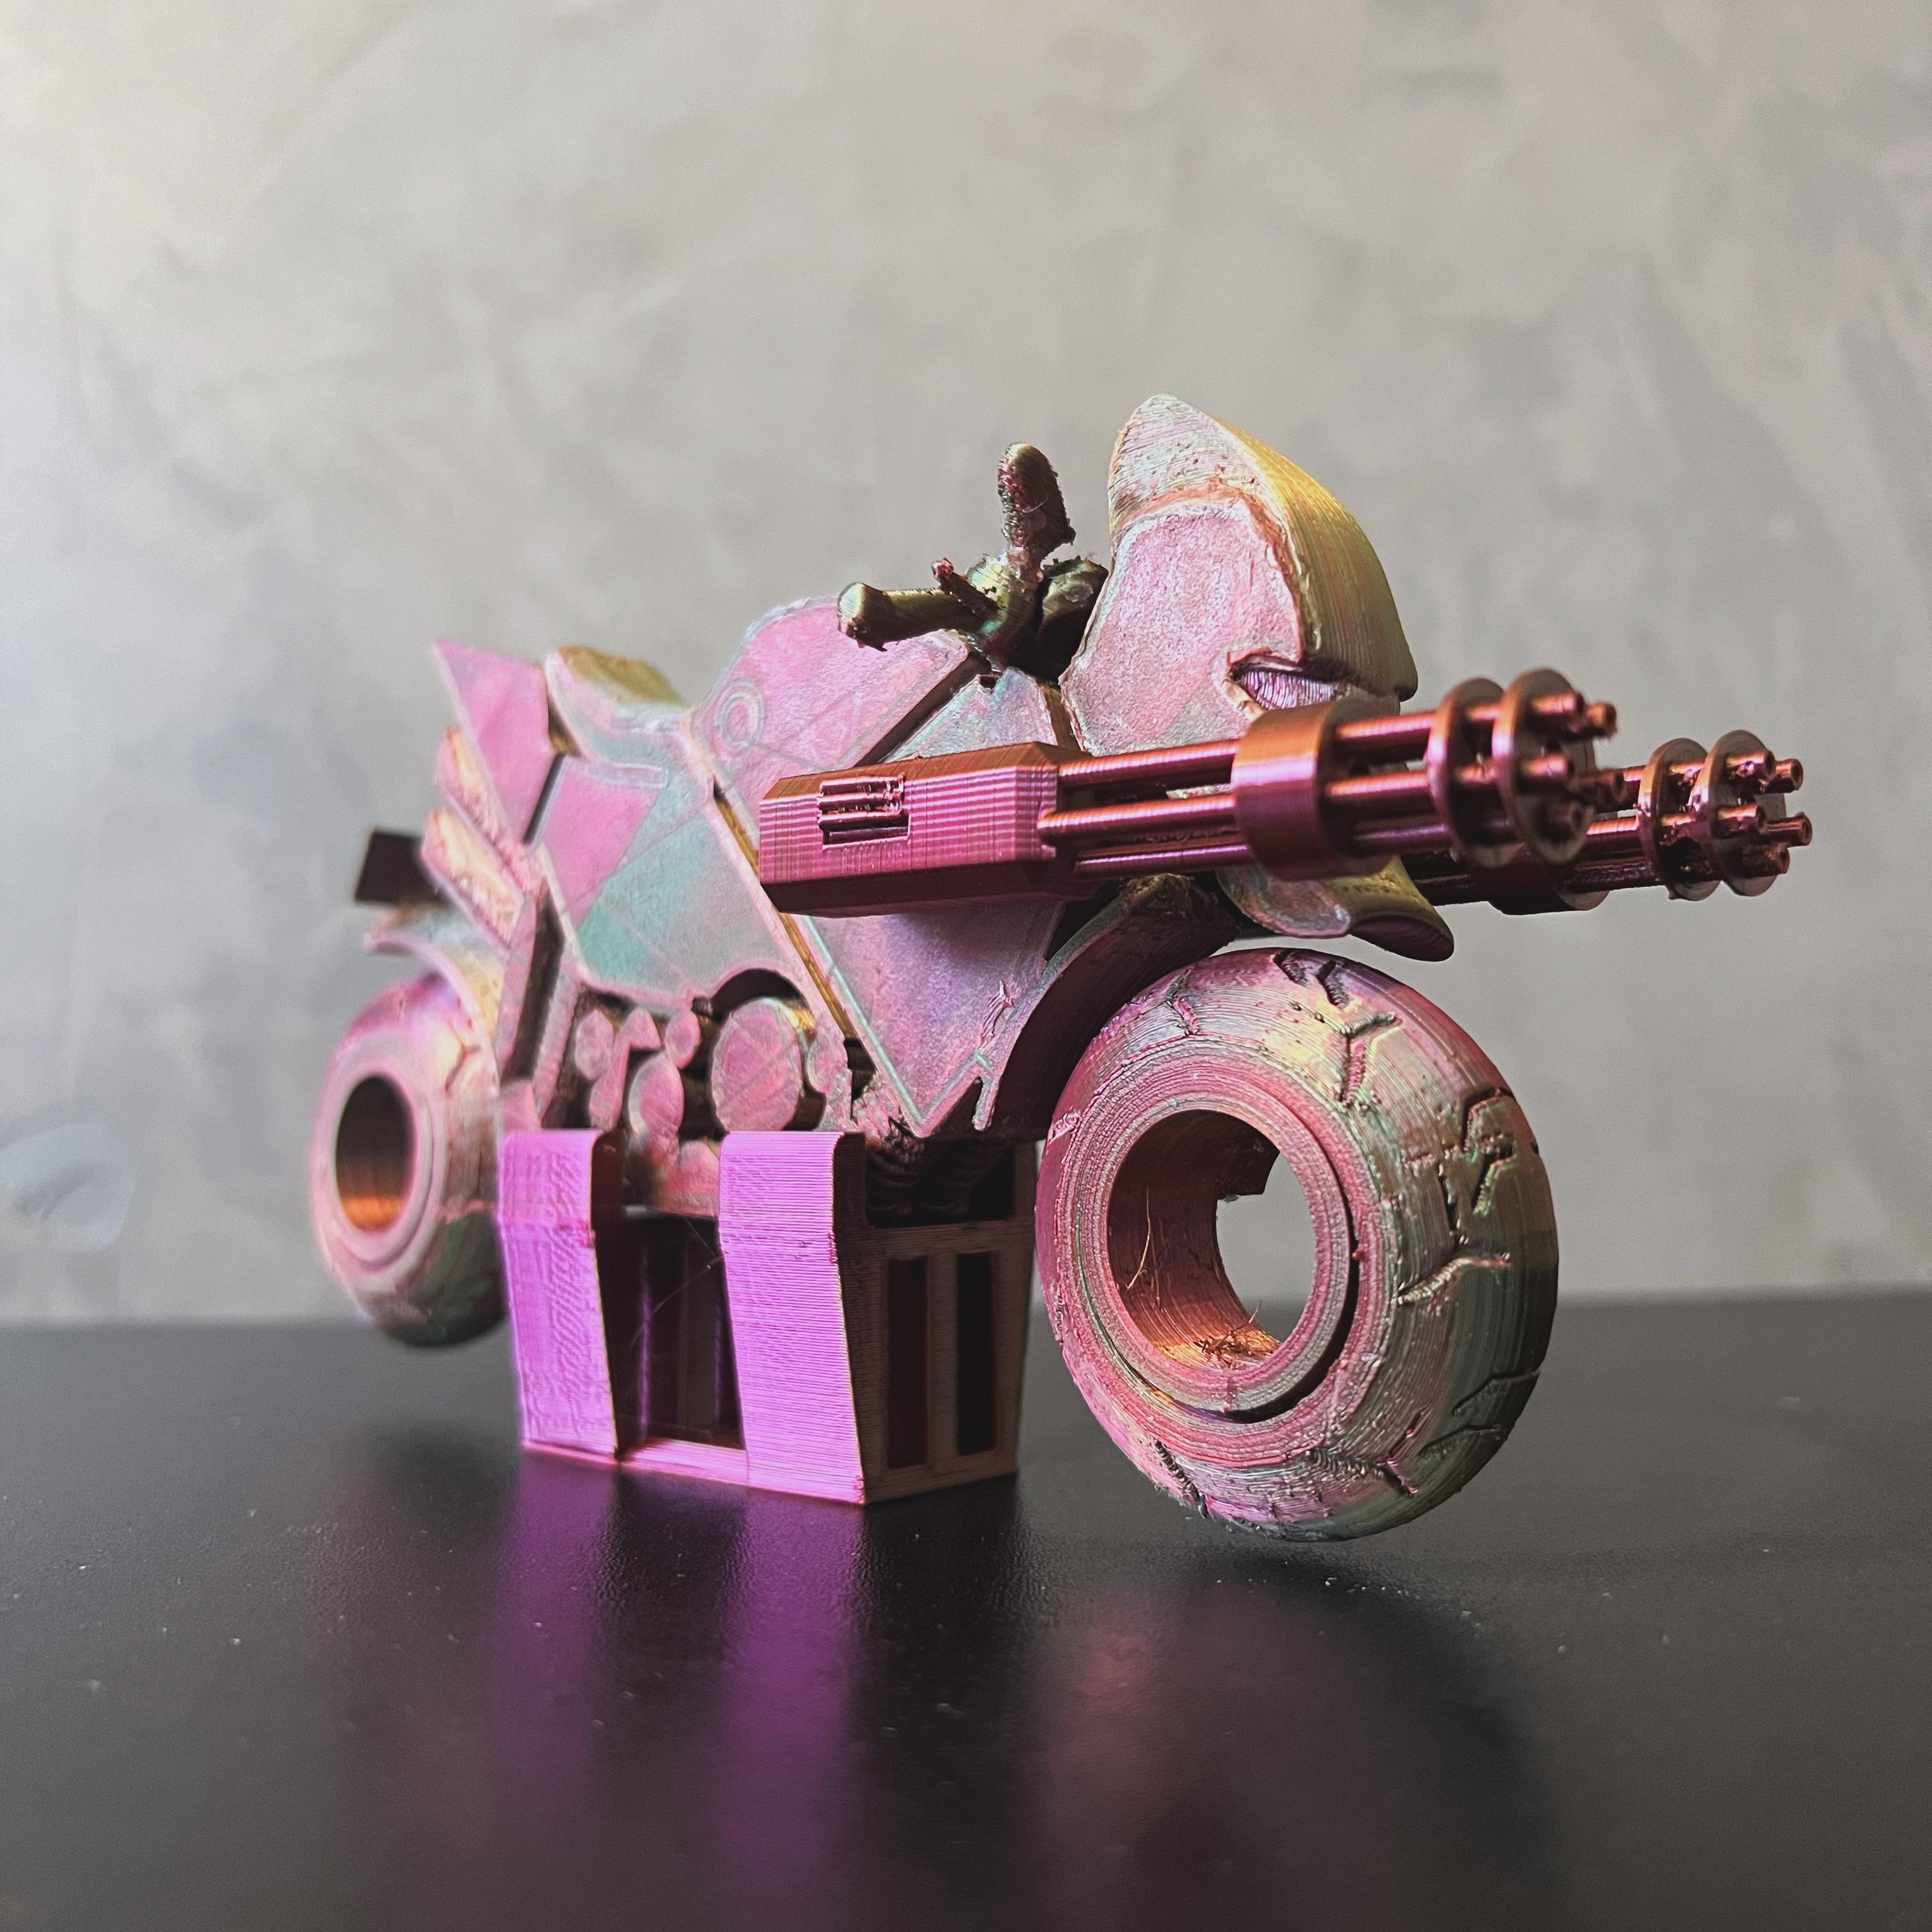 Motorbike Fury Duck - Print-in-place - No support 3d model